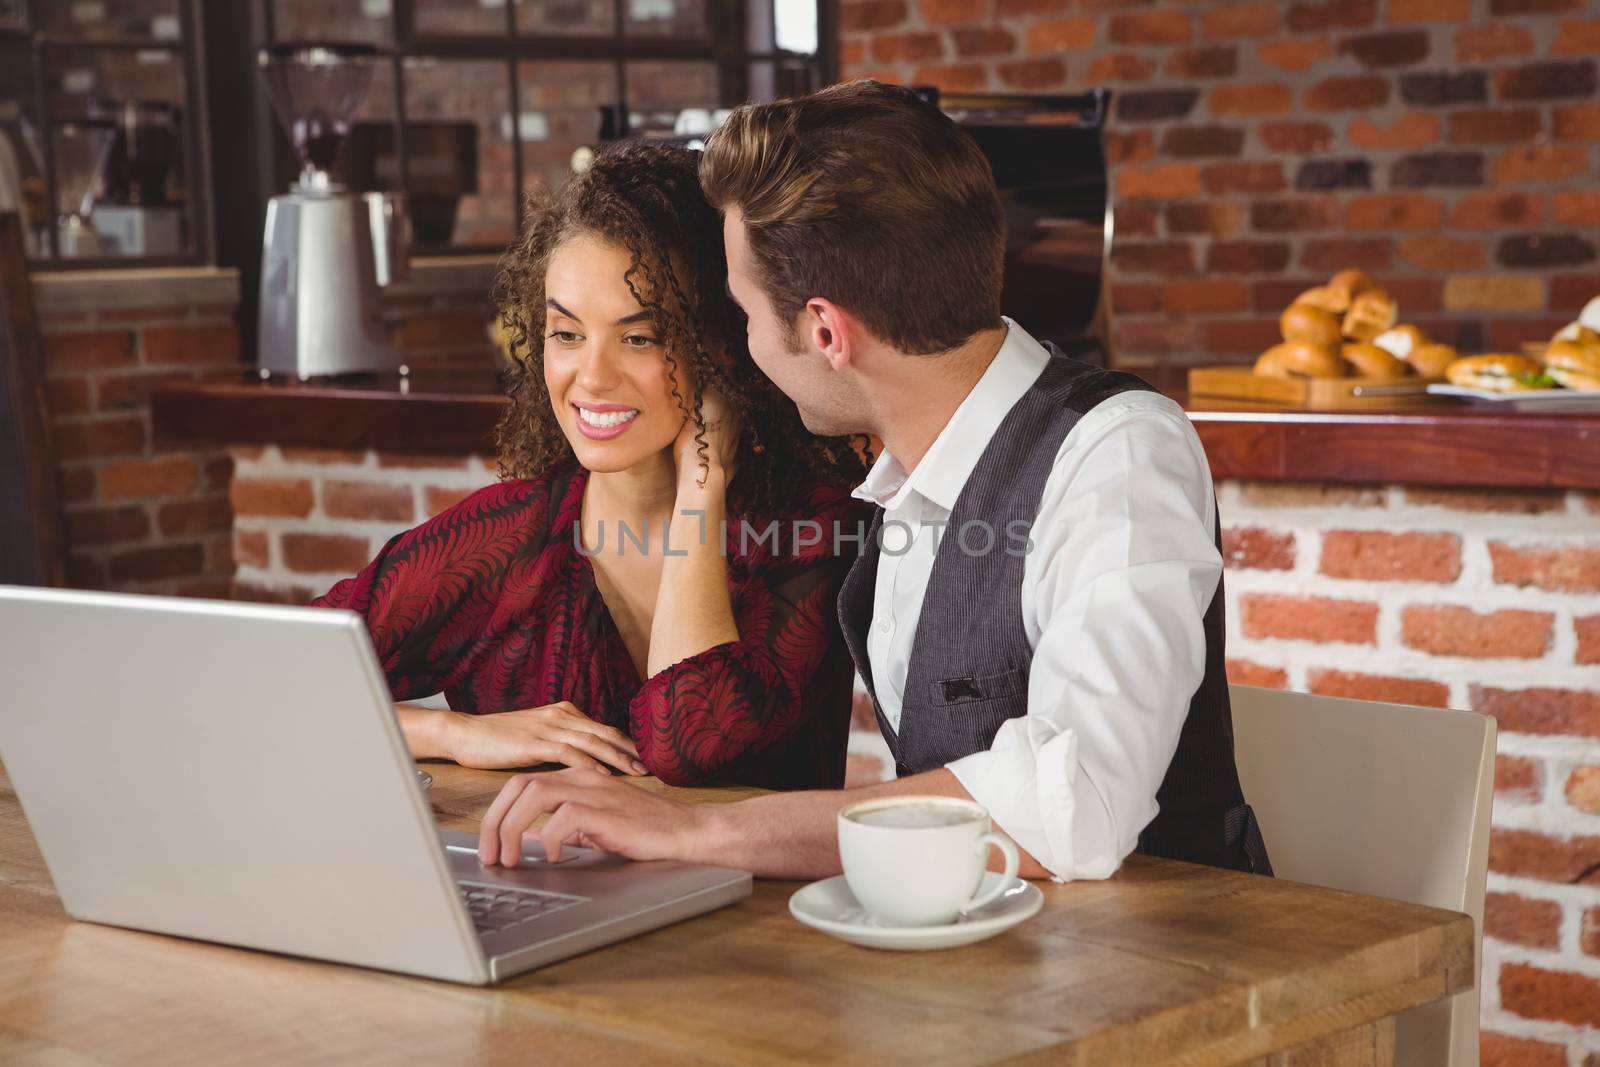 Cute couple on a date watching photos on a laptop by Wavebreakmedia